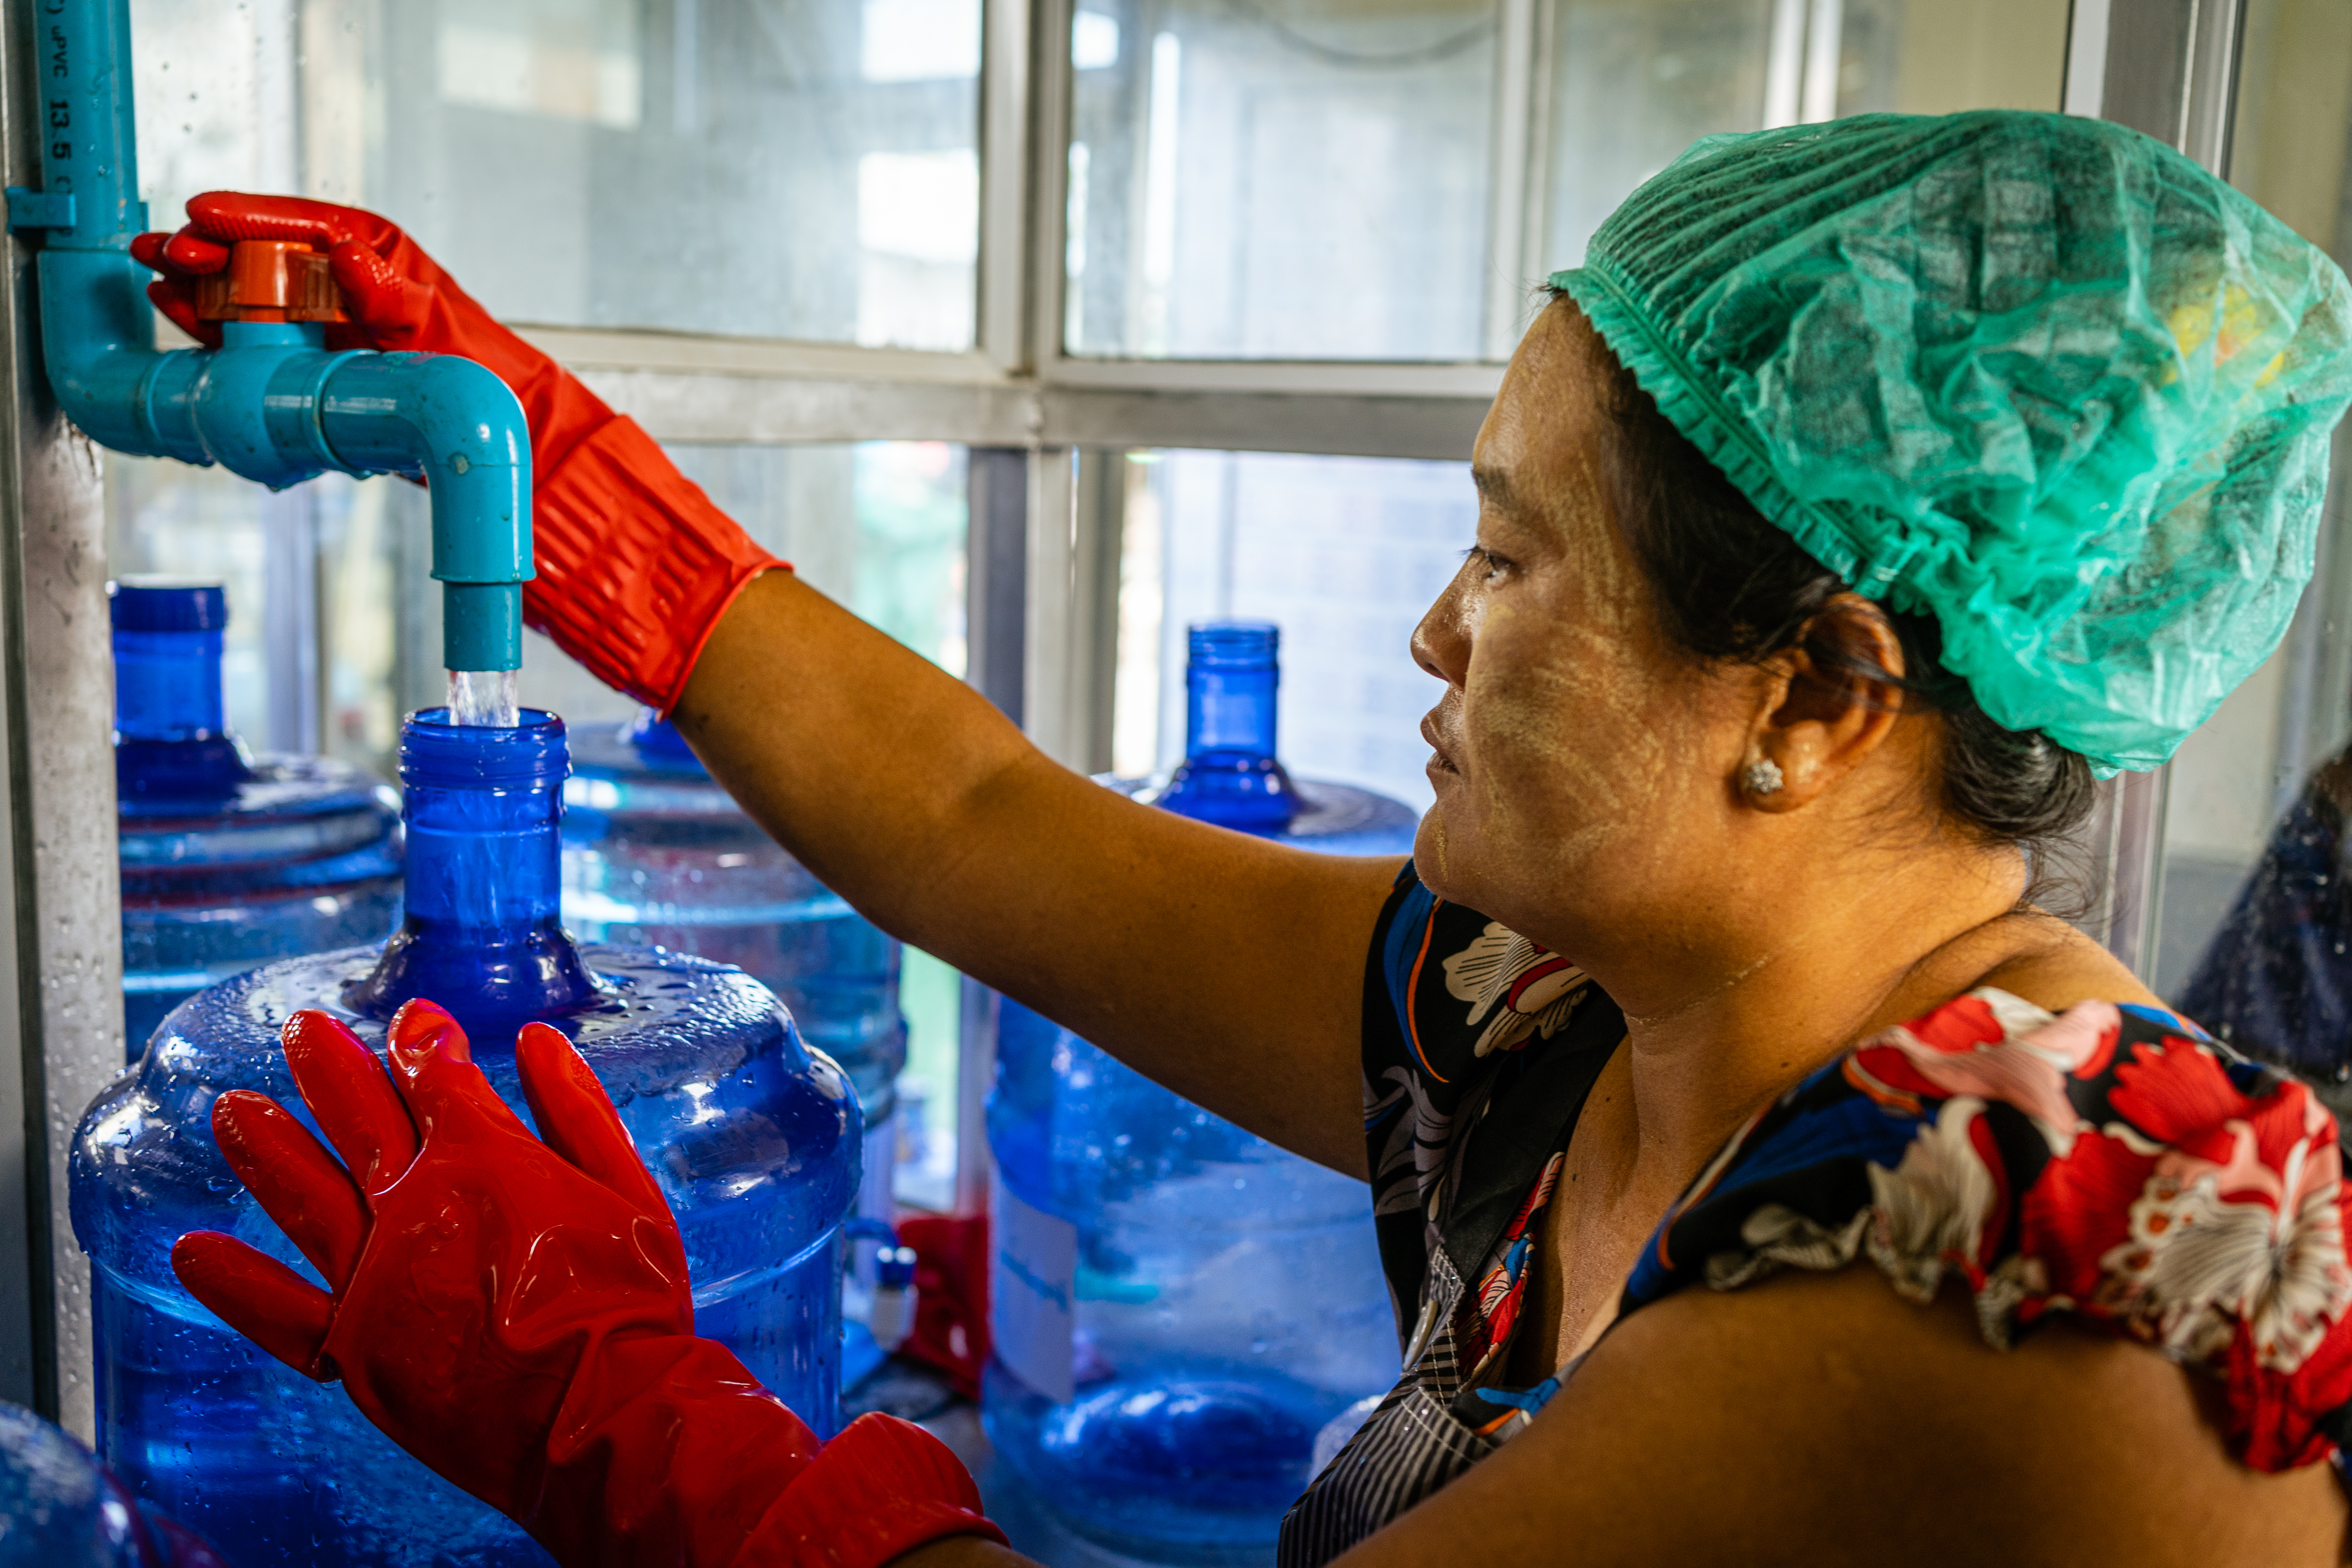 Ma Lin Lin fills a bottle with clean drinking water at the facility she leads in Yangon's Hlaingtharya Township (c) Ben Small/UNDP